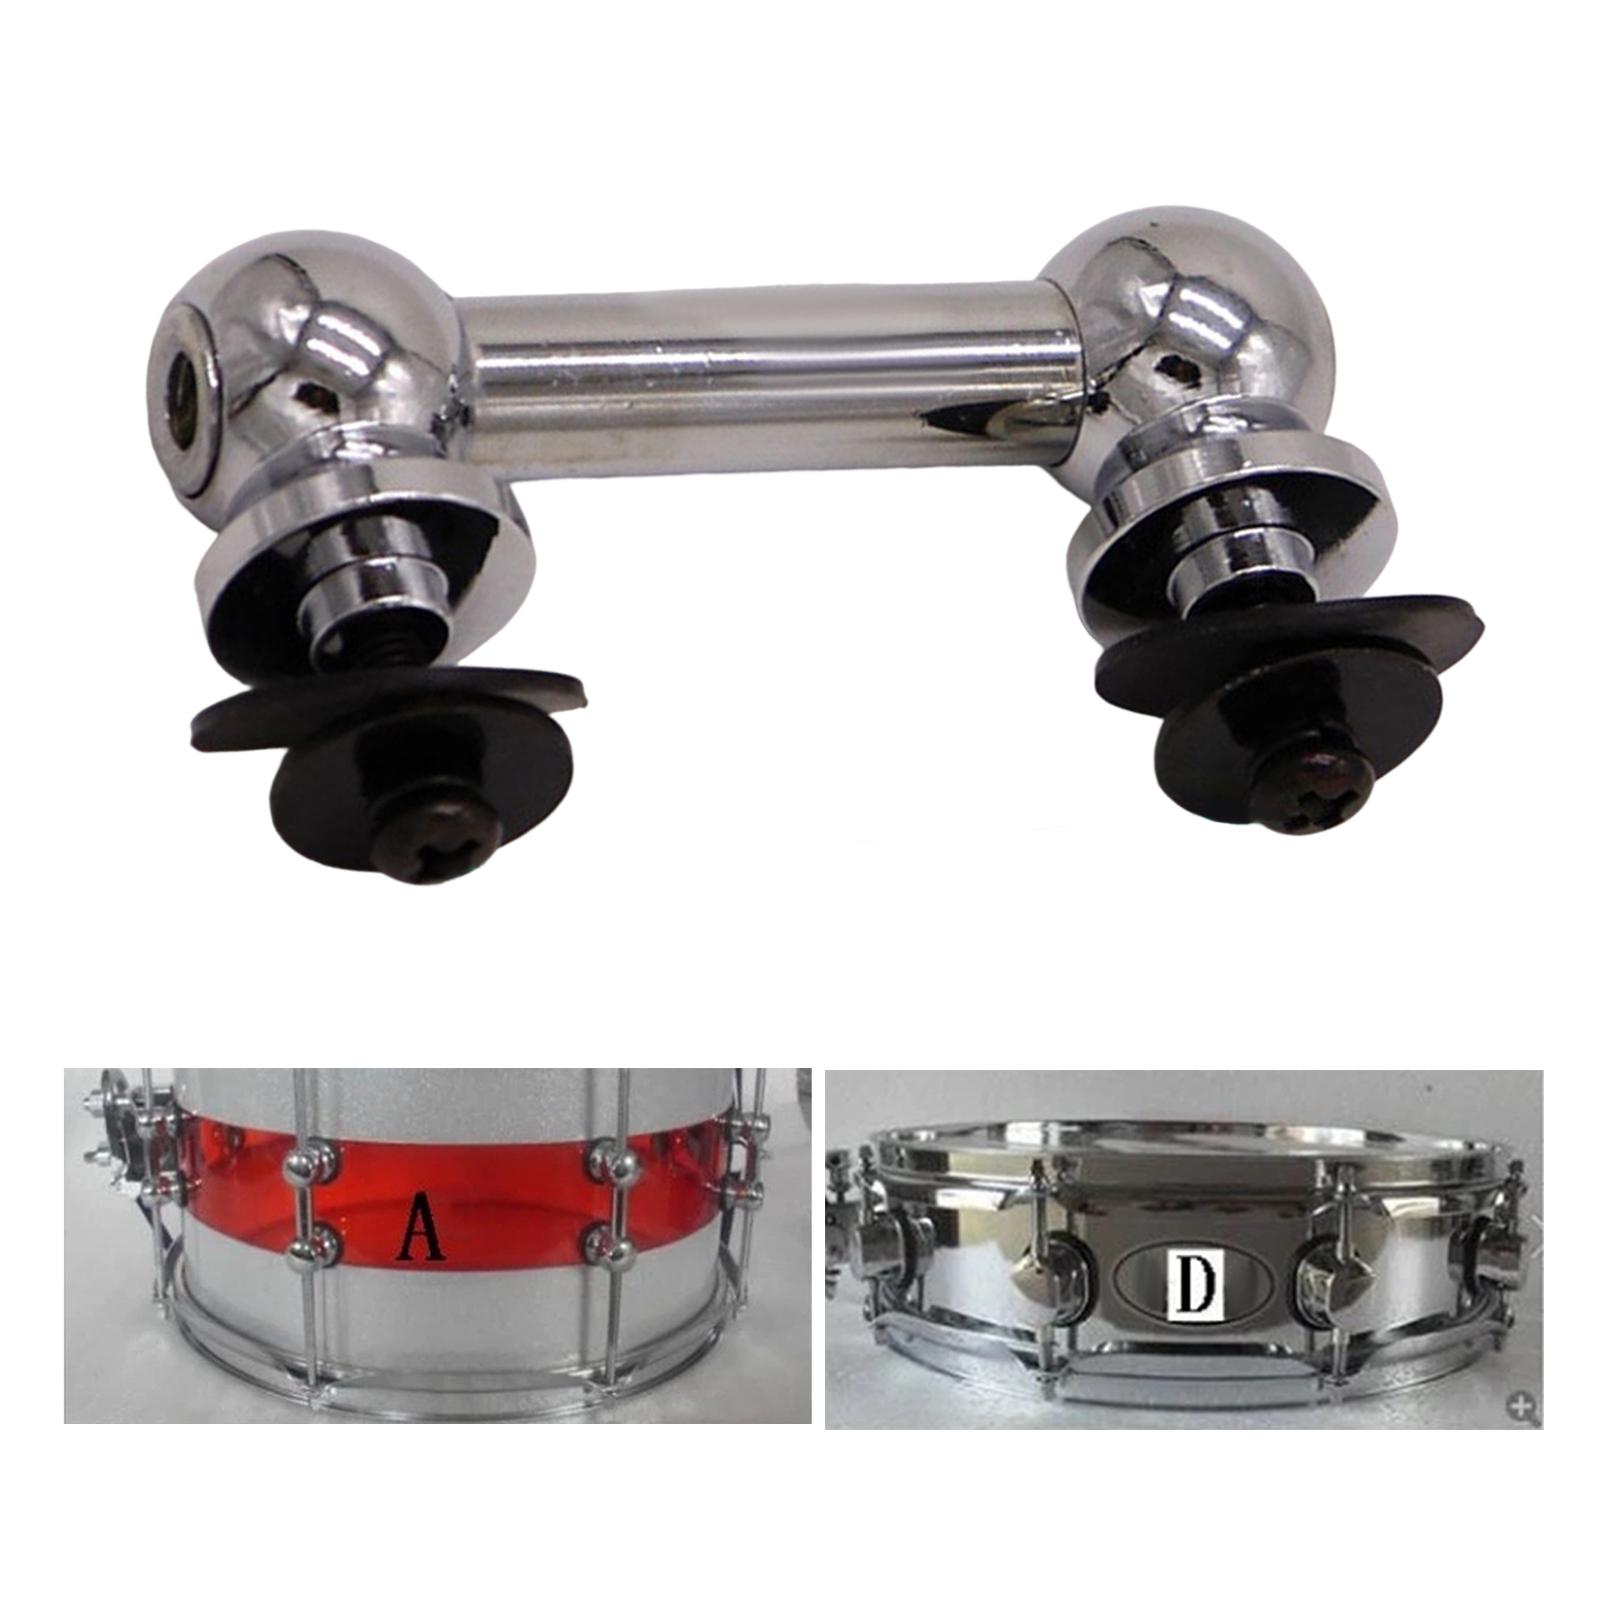 51mm Double End Drum Lugs Two Side Drum Lug Snare Drum Lug Drum Accessories